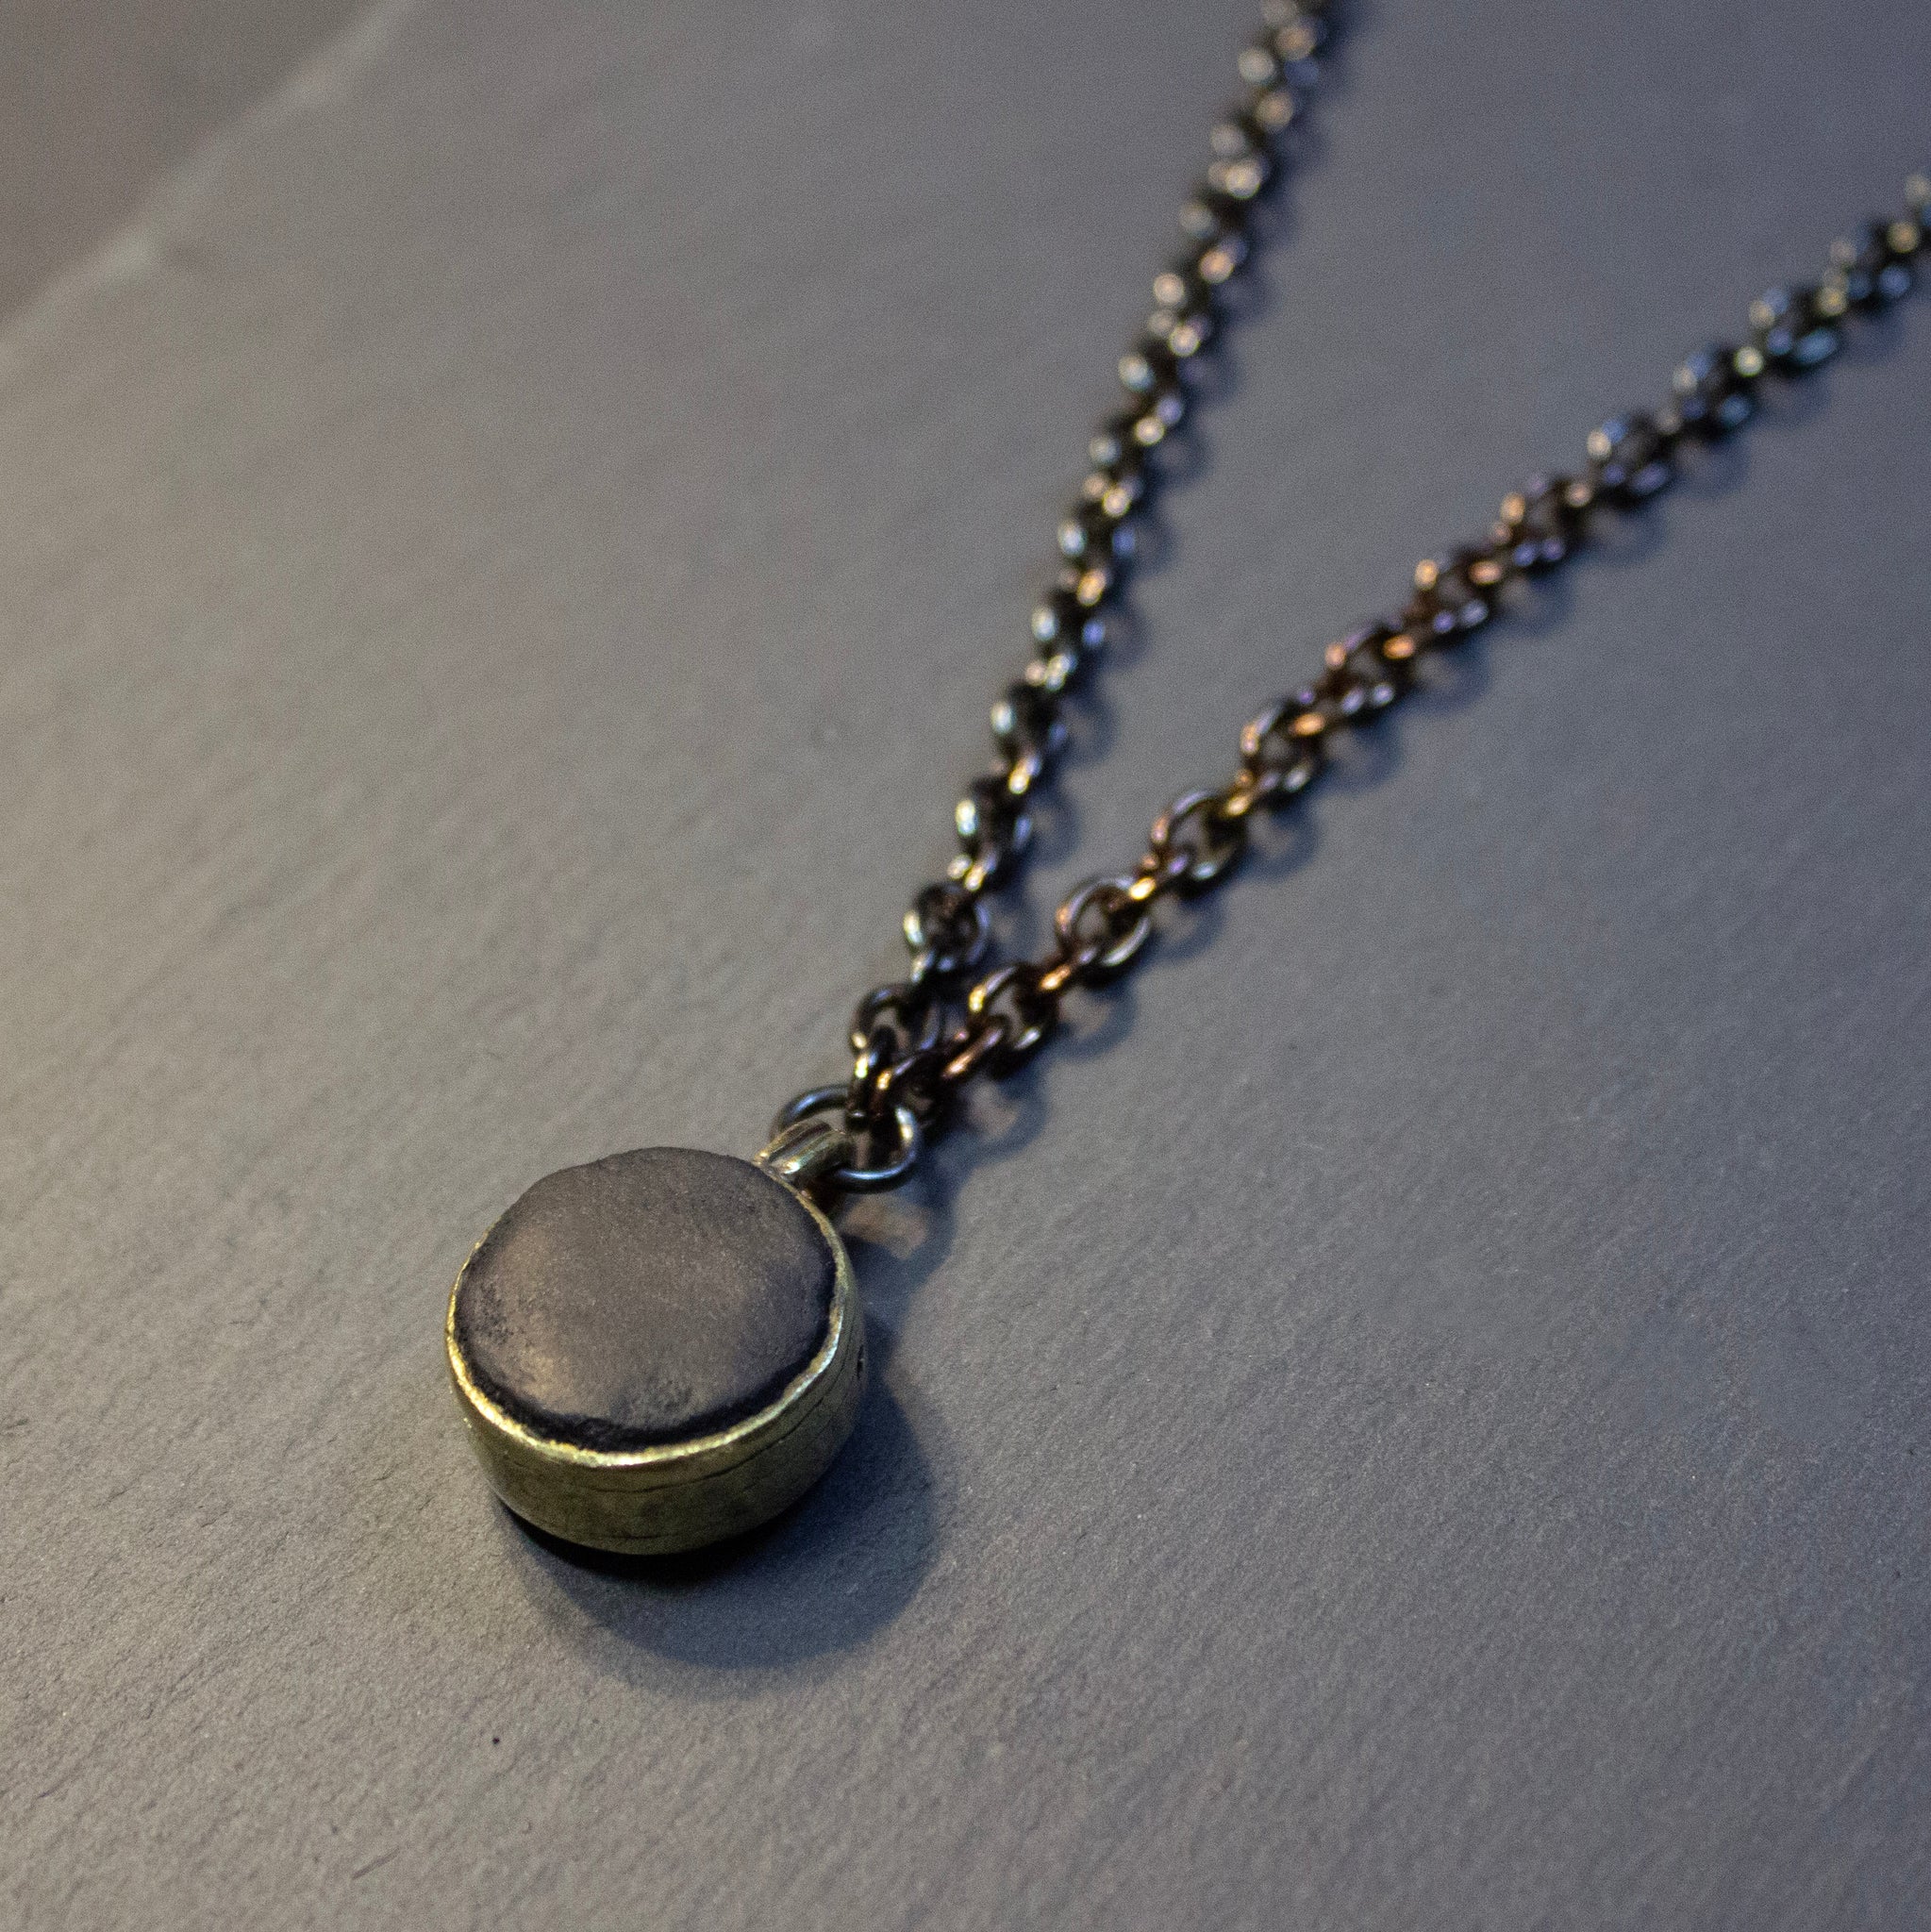 Leather and brass pendant on black chain. This pendant features a leather core, wet moulded and held in place via brass pins. The chain has been treated so that it has slight variations of colour, from warm bronze to black